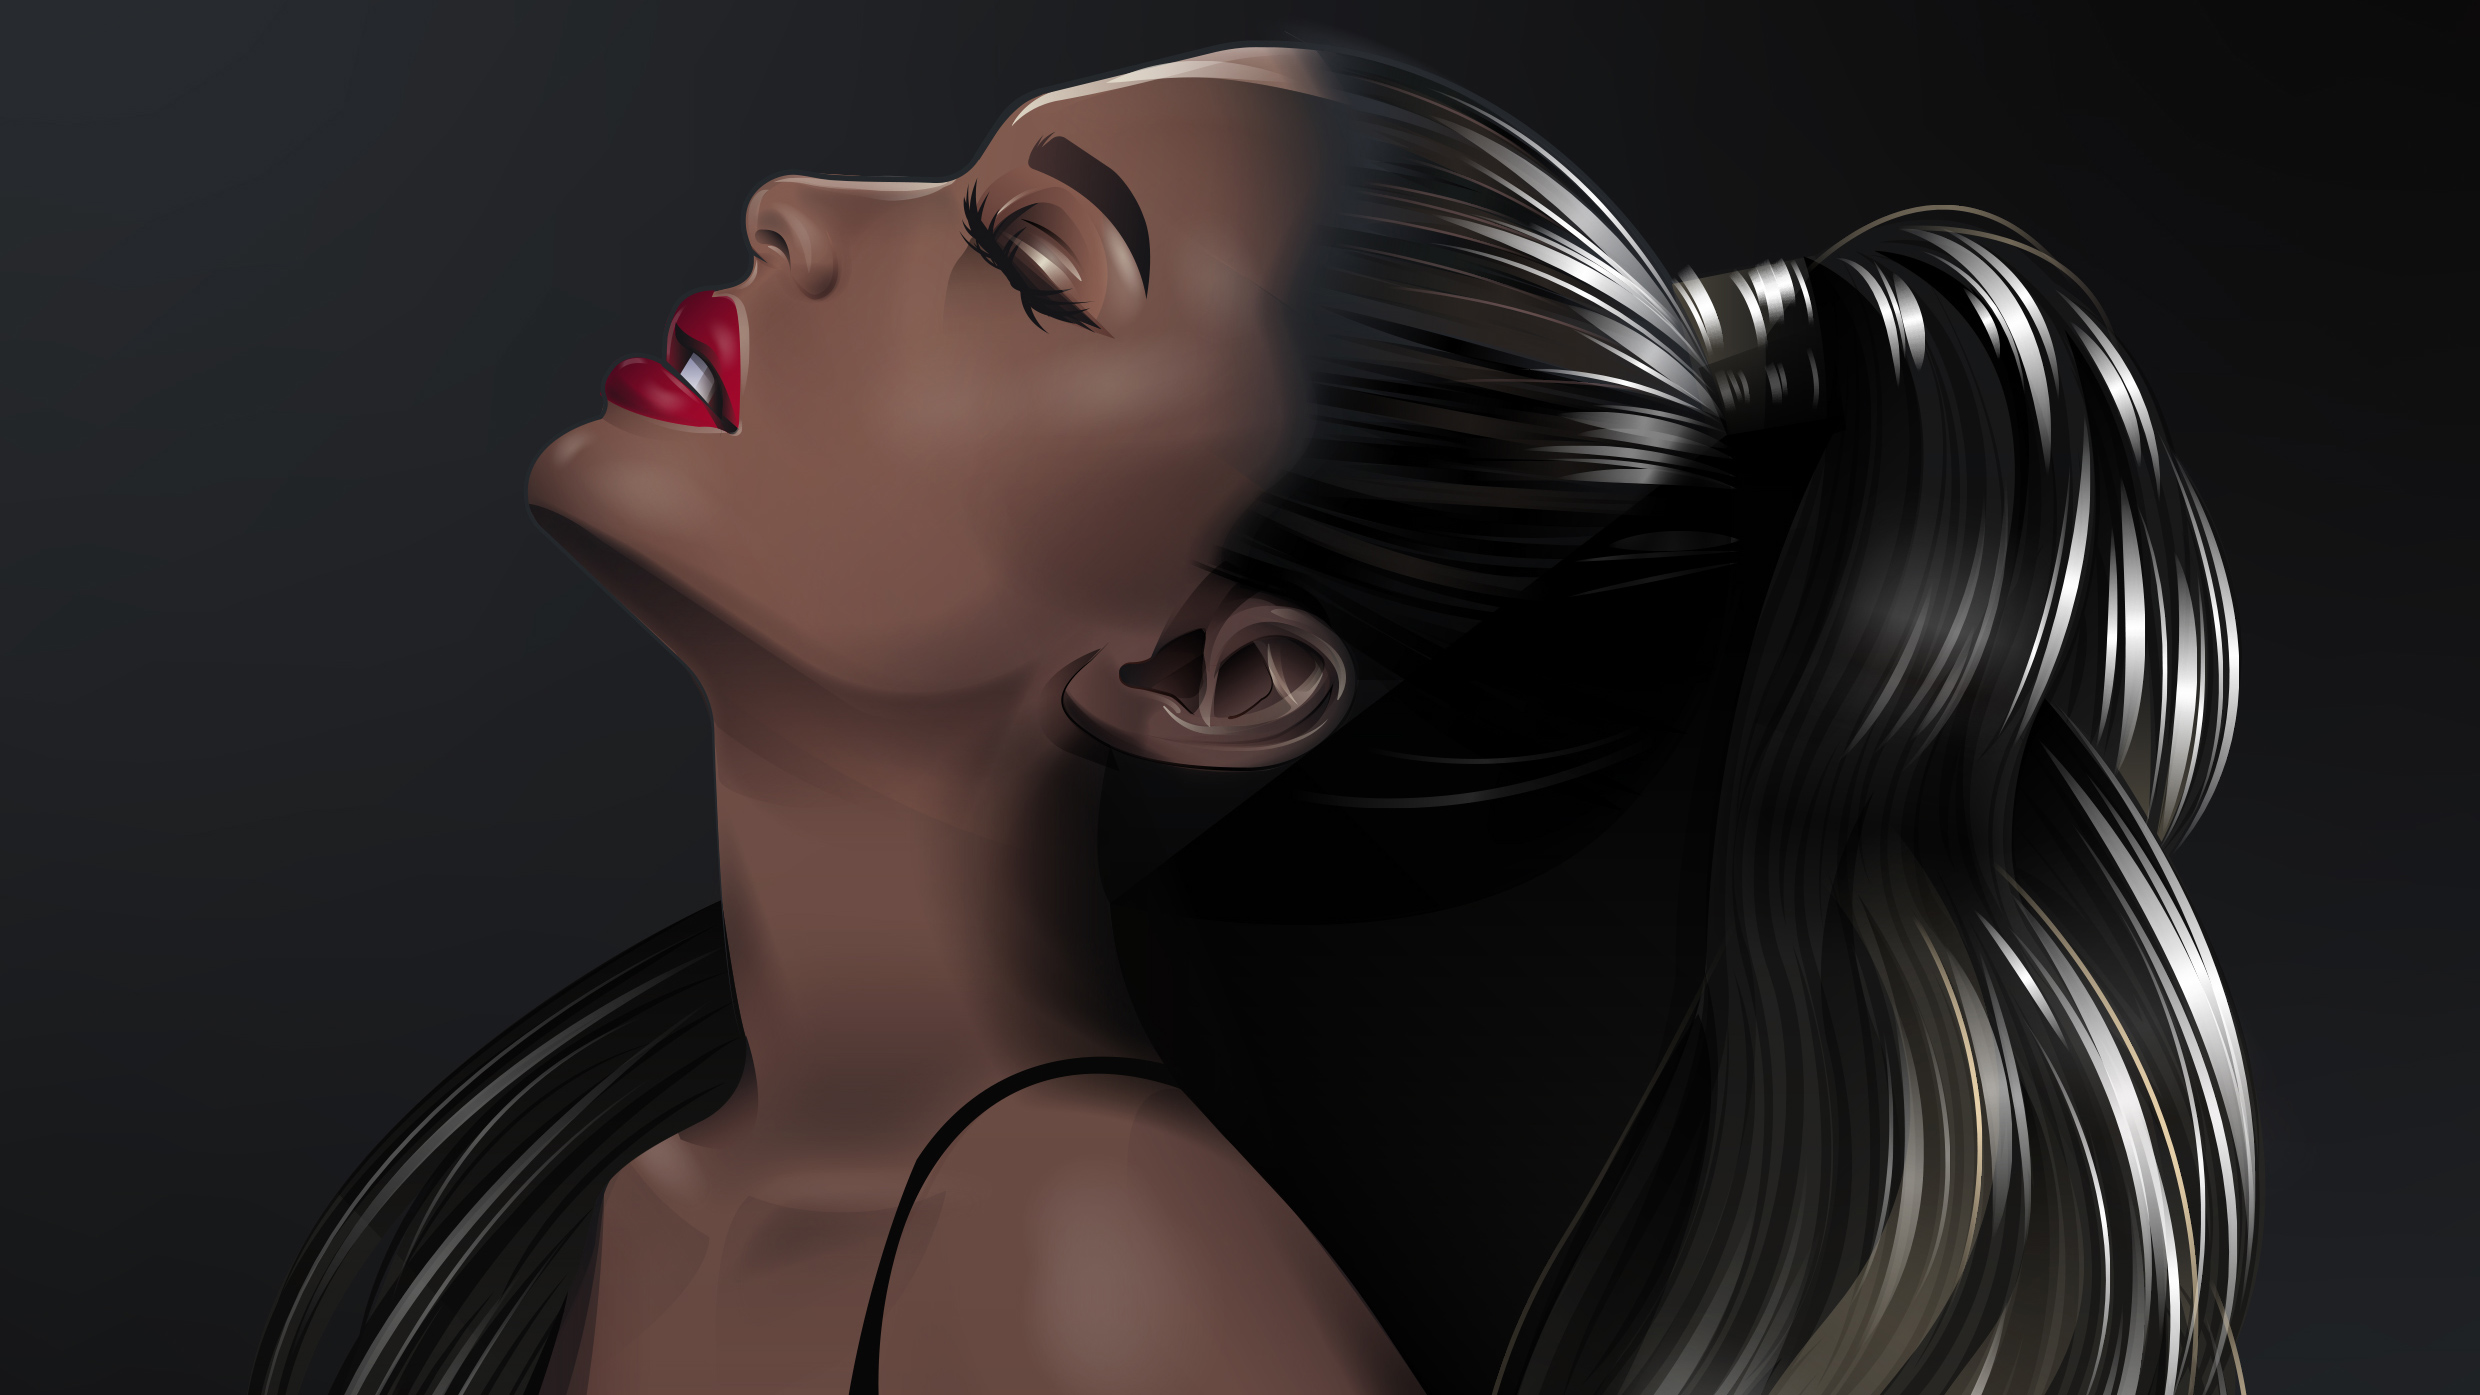 Ariana Grande Vector, HD Celebrities, 4k Wallpaper, Image, Background, Photo and Picture